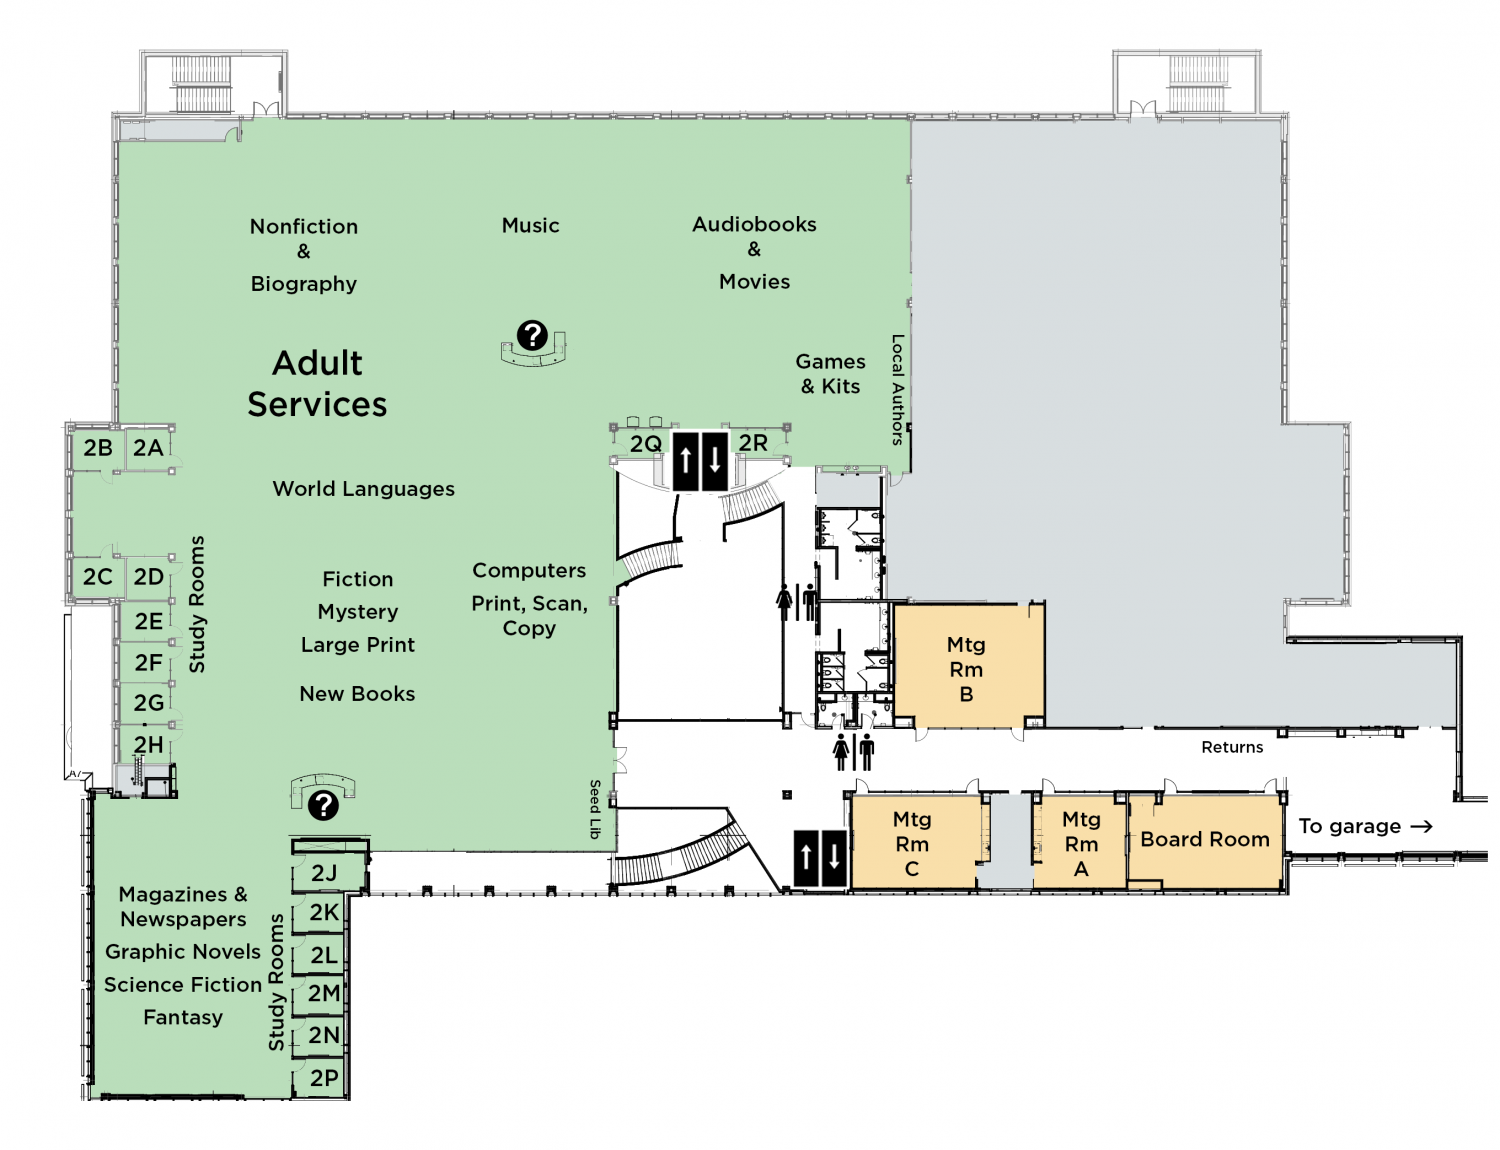 Second floor plan of Main Library